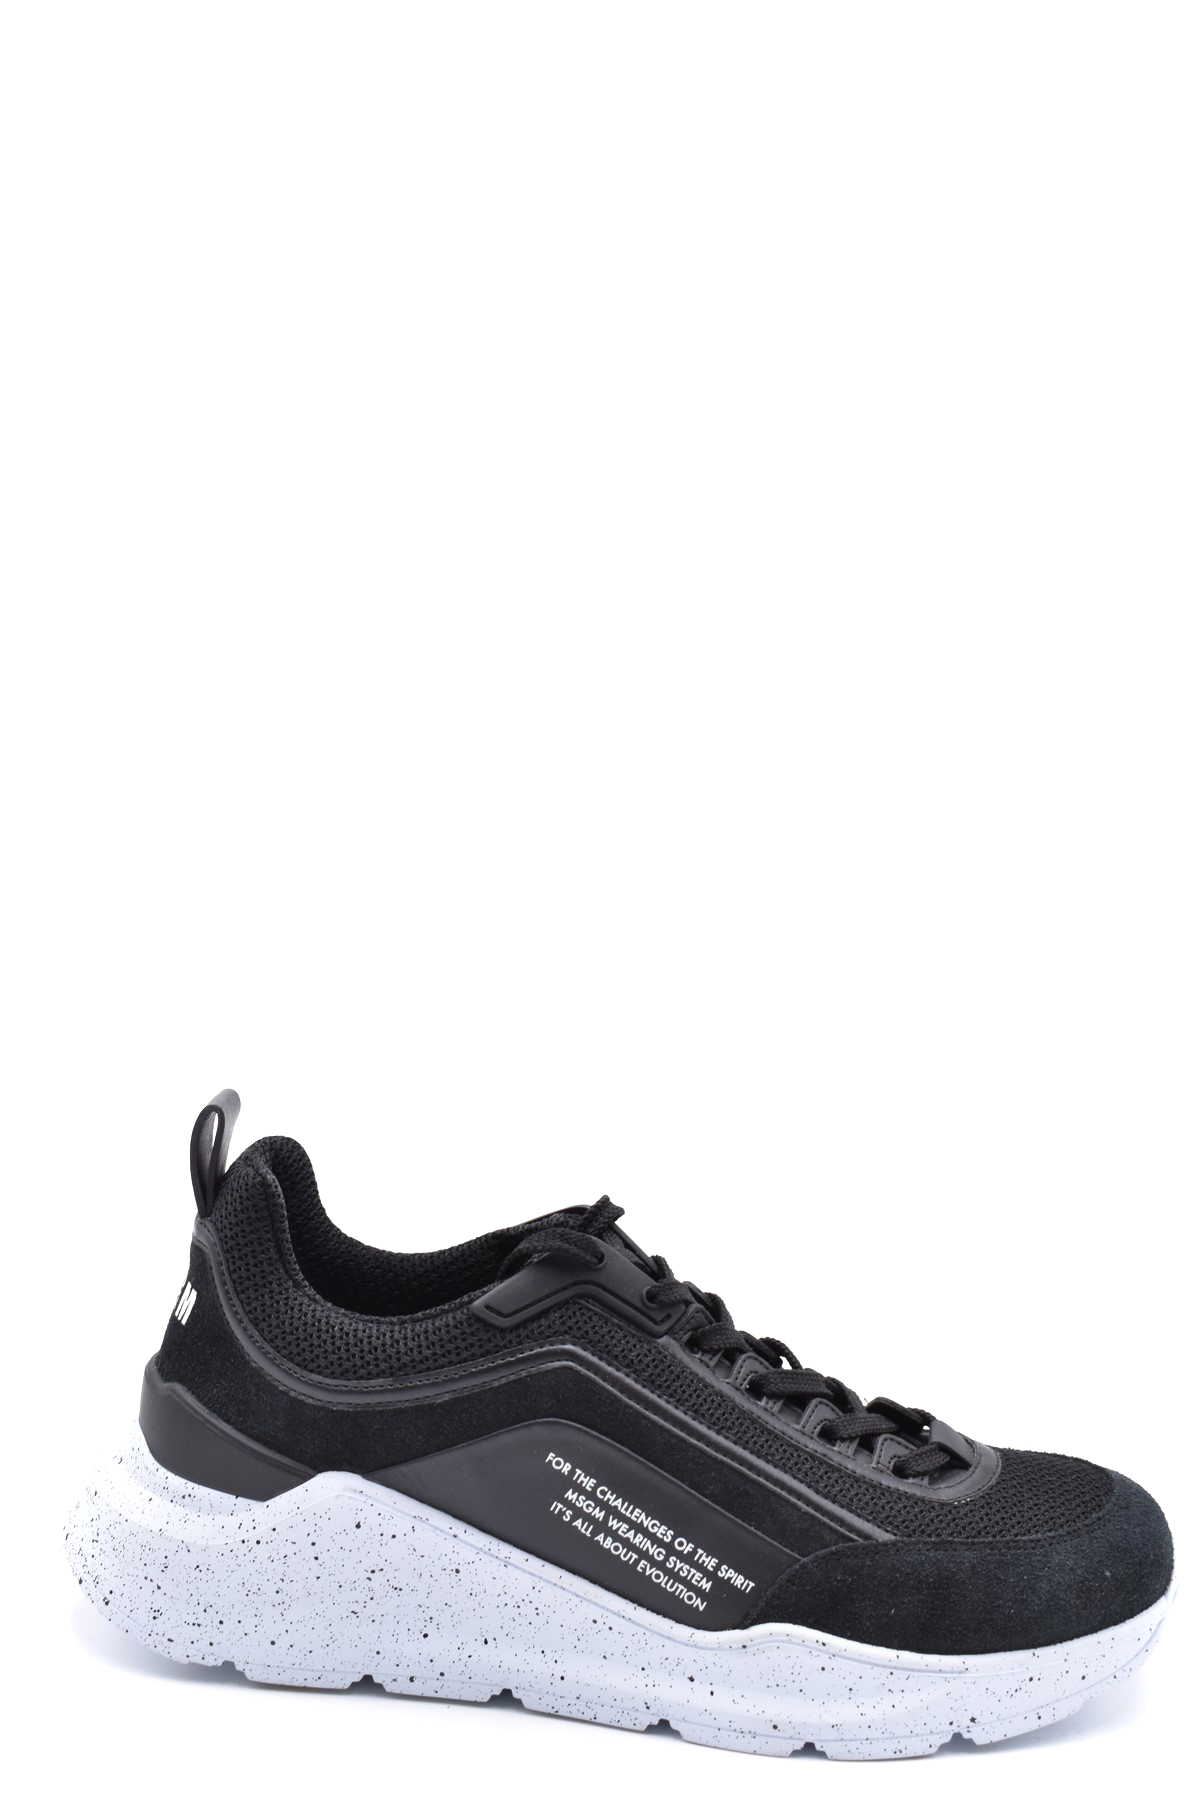 Shoes MSGM EPT12228 - Outlet Bicocca